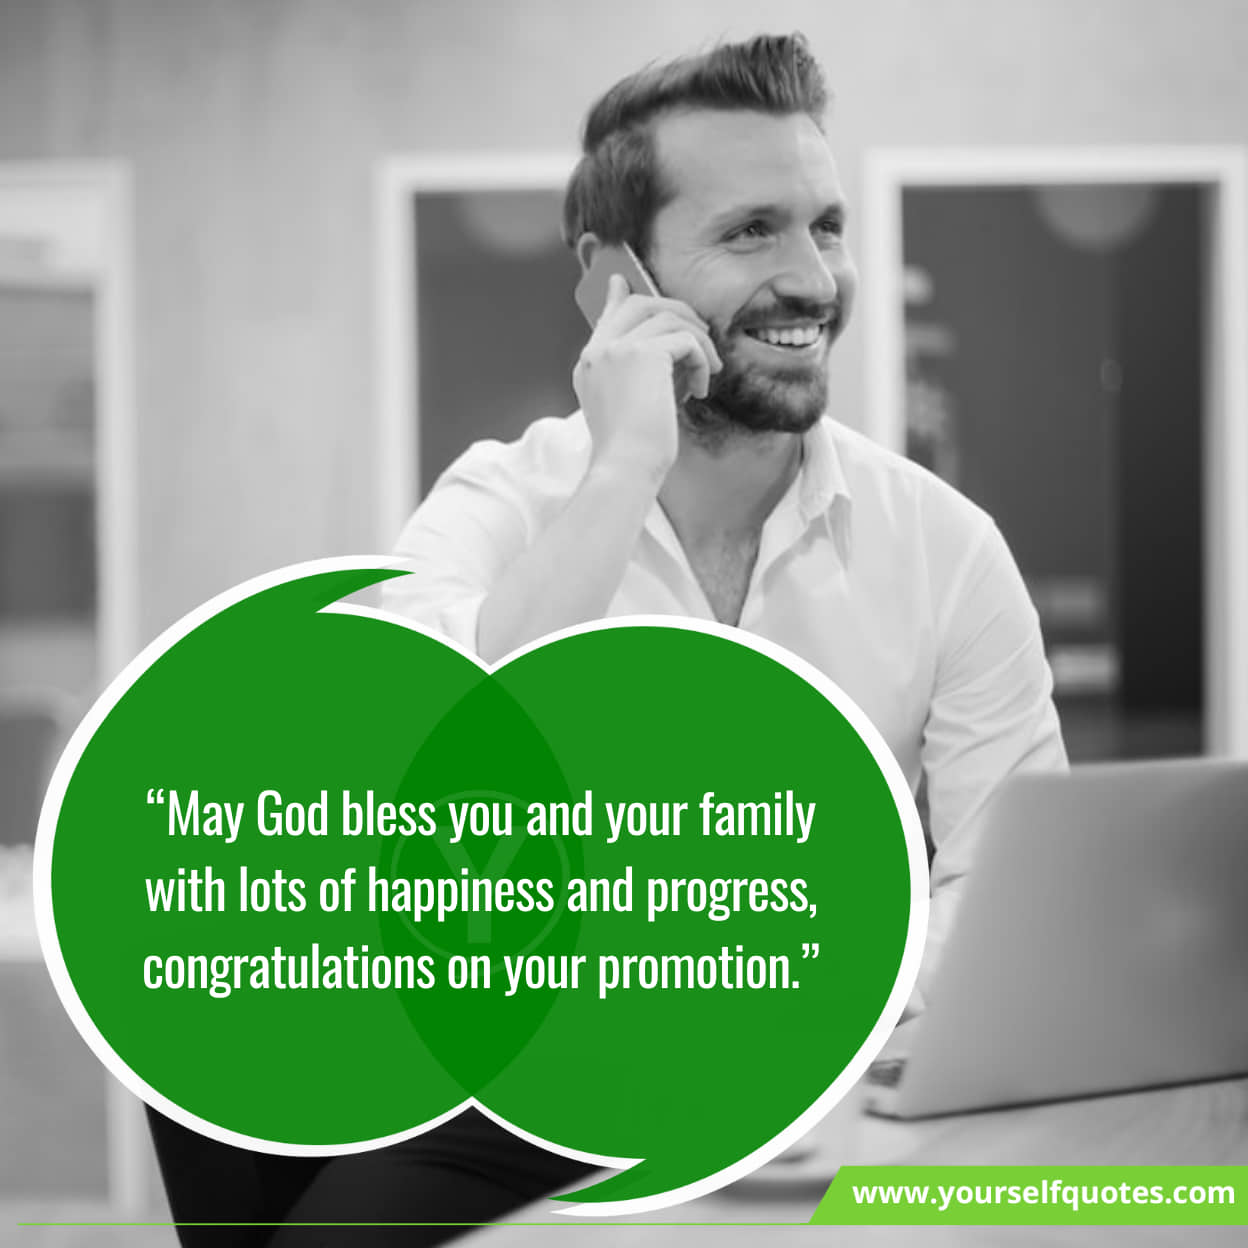 Encouraging Congratulations Message on Promotion